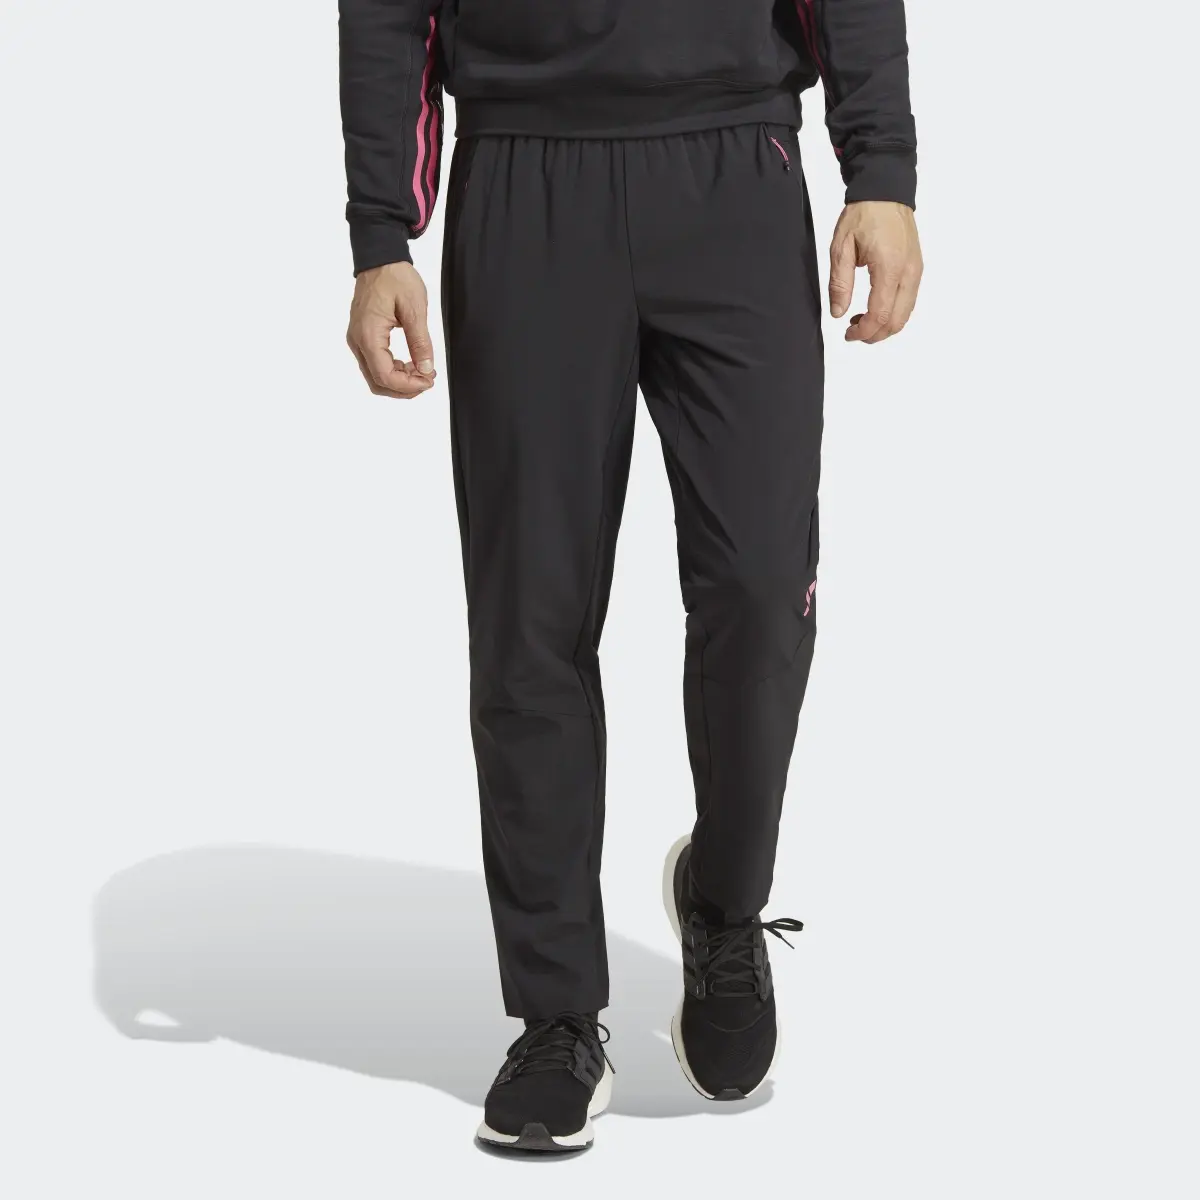 Adidas HIIT Pants Curated By Cody Rigsby. 1